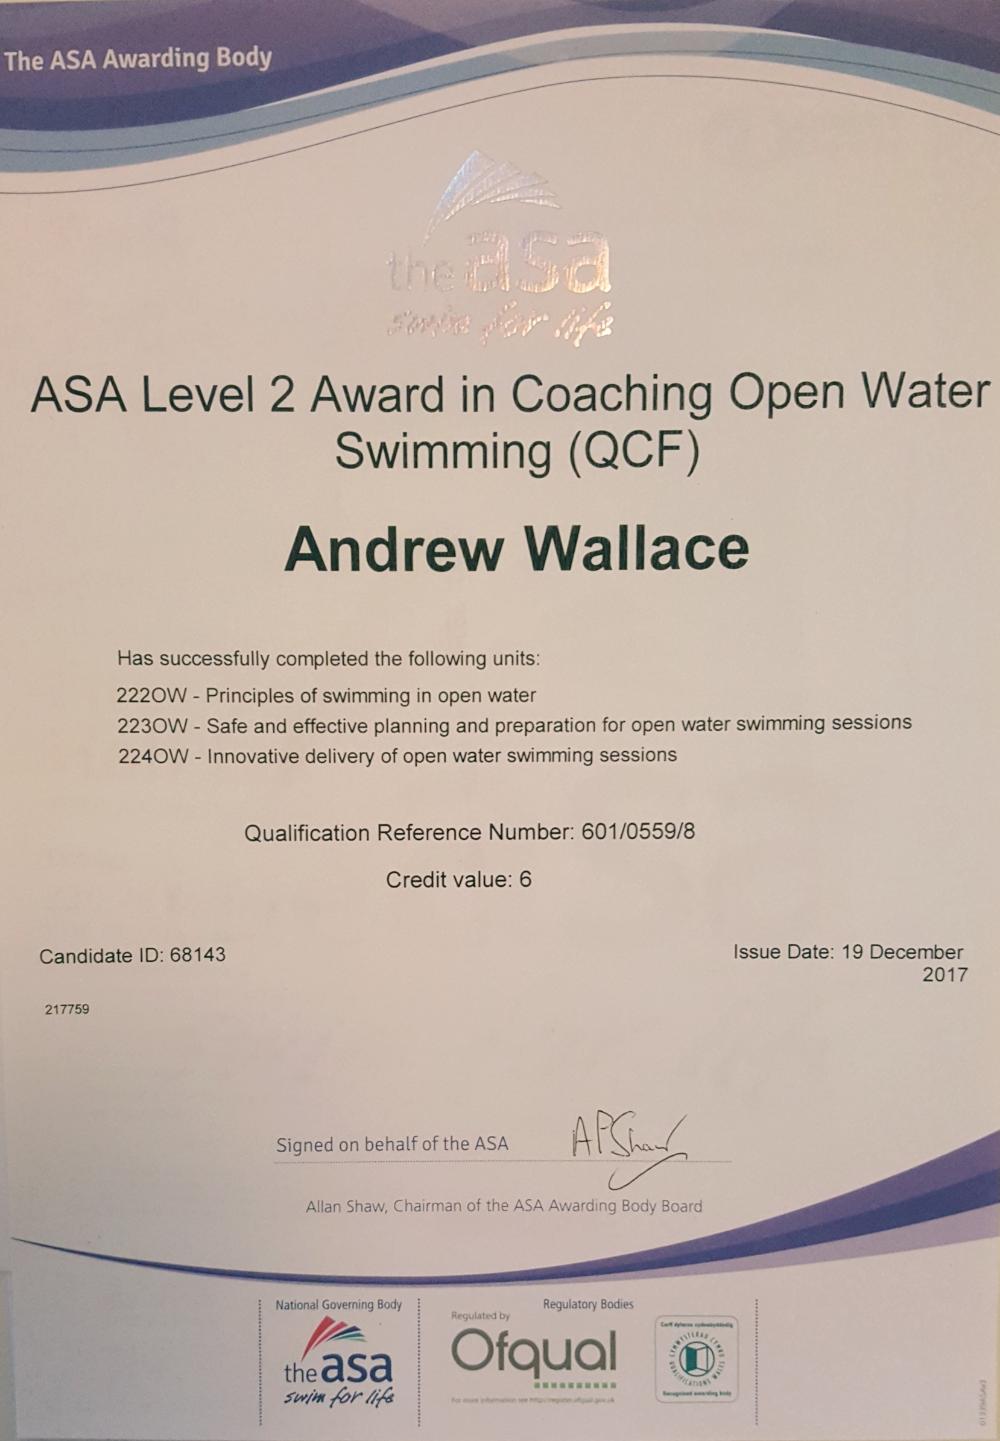 Christmas Arrives Early with Awarding of the ASA Level 2 Award in Coaching Open Water Swimming